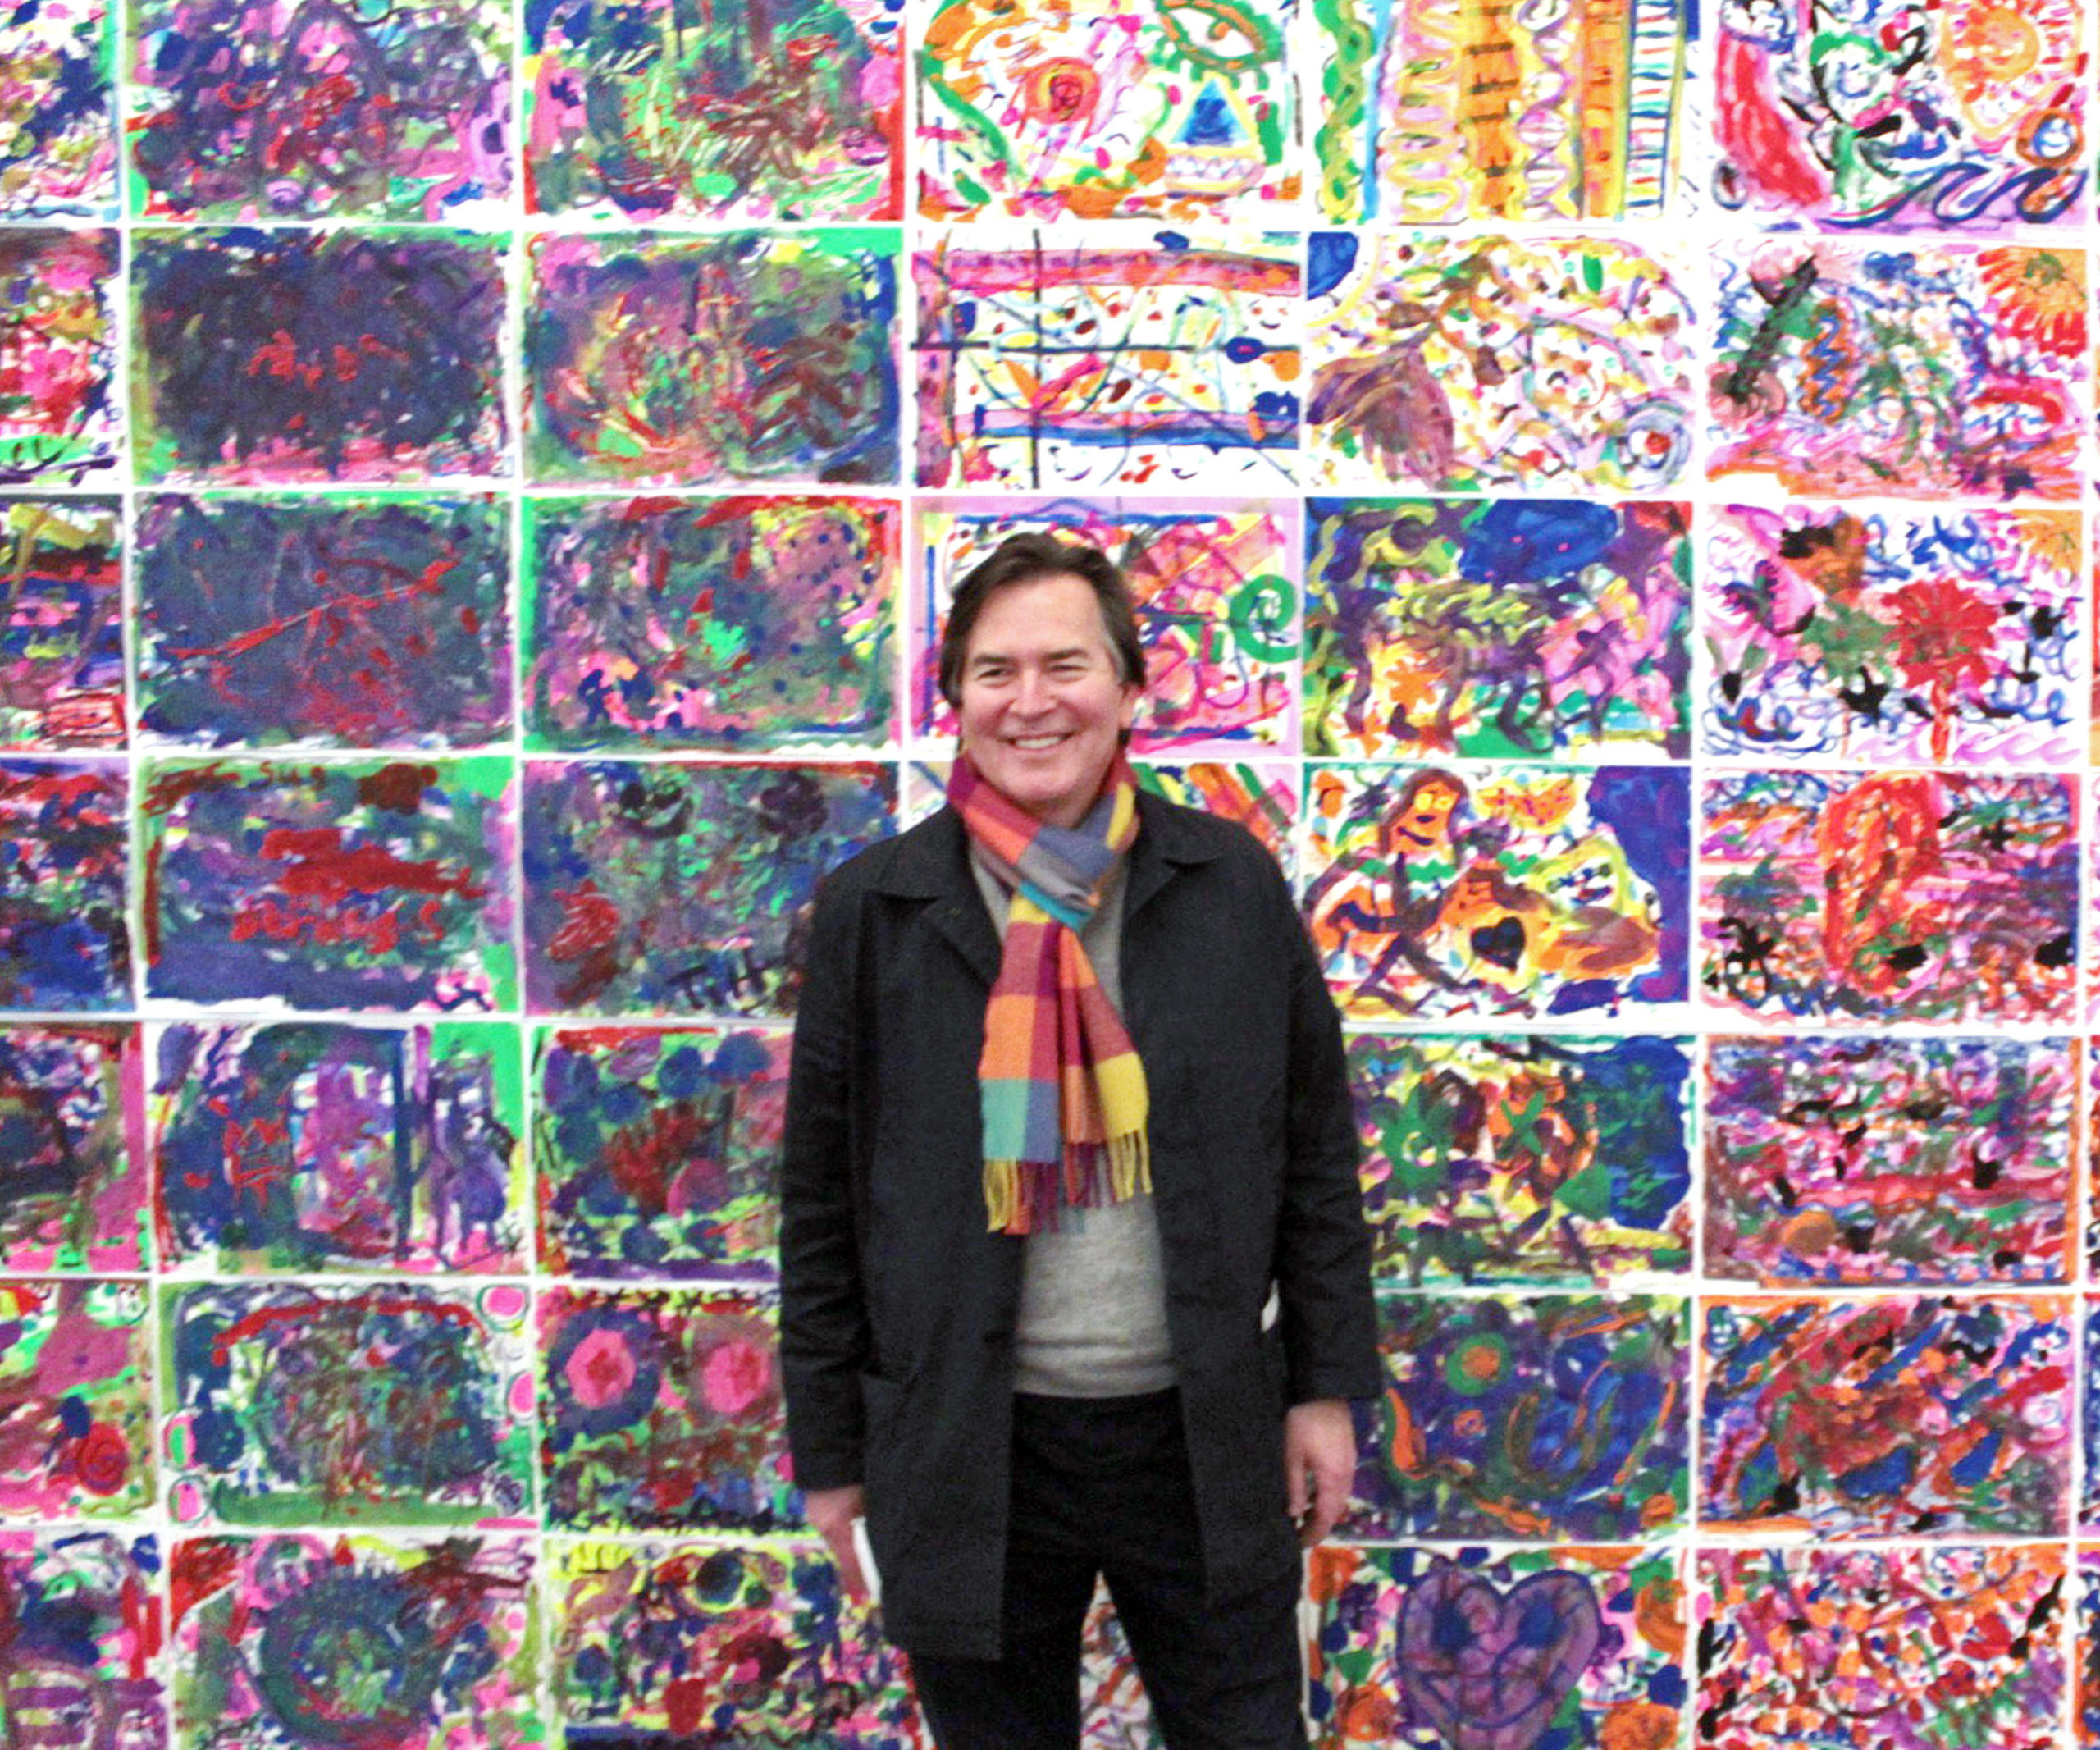 Artist-in-residence Eric Dever in front of the collaborative mural created by 250 students on site at the Parrish. TOM KOCHIE